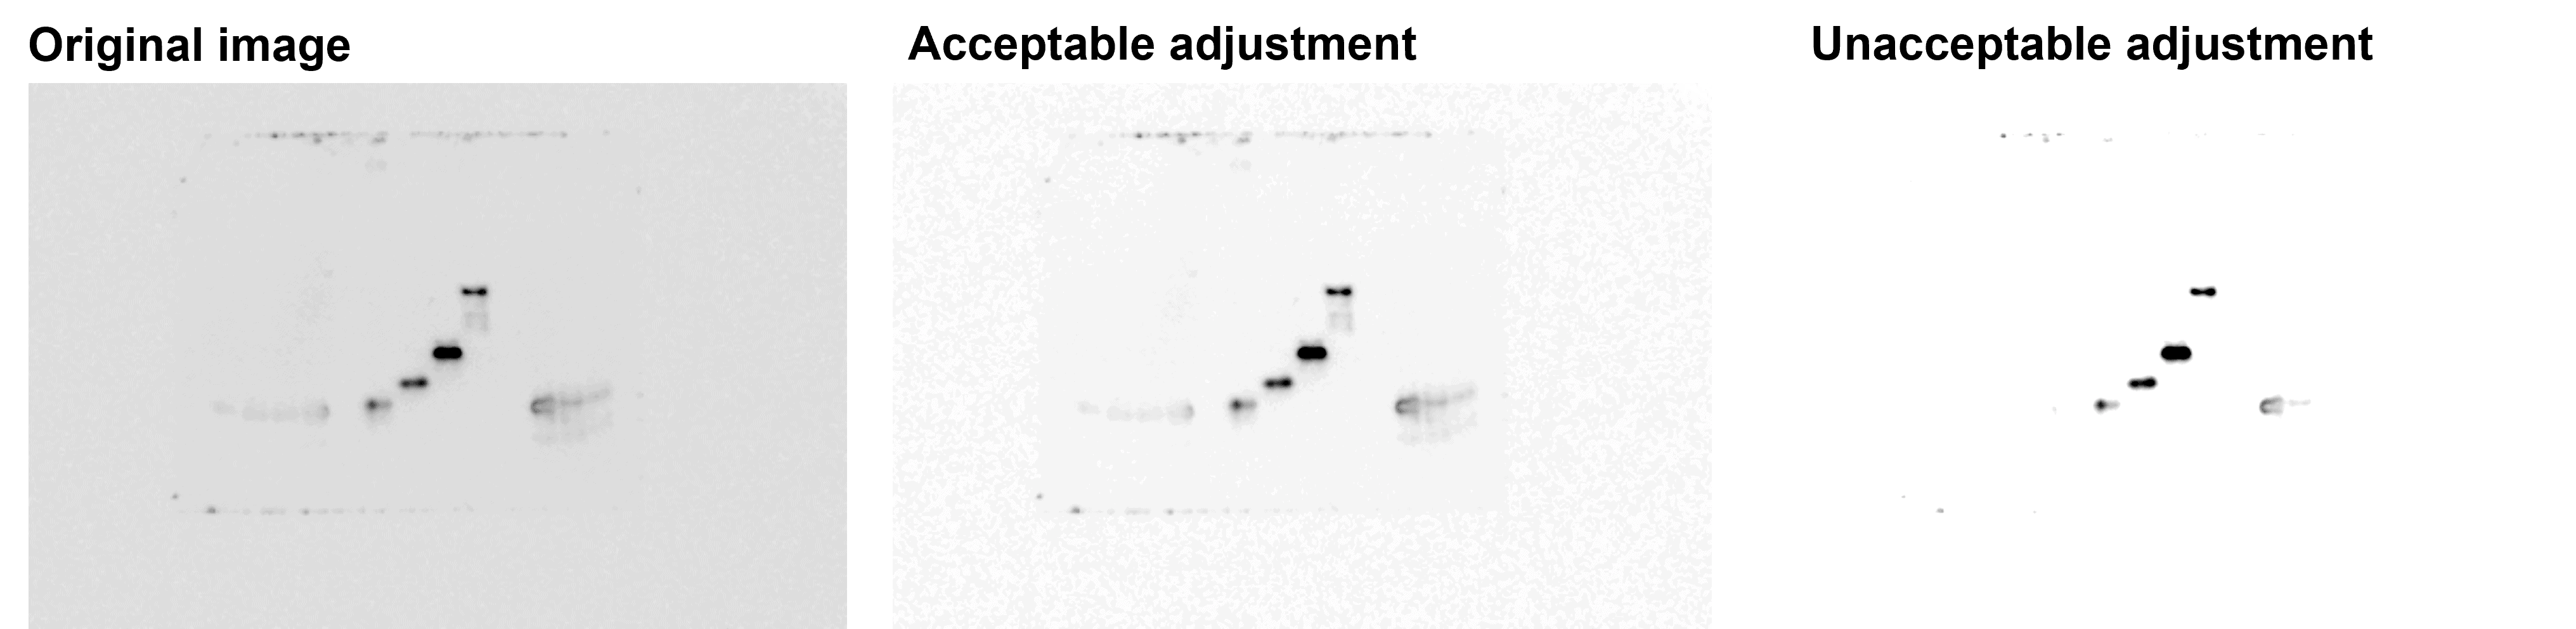 An example of a western blot whose contrast settings have been inappropriately adjusted. 